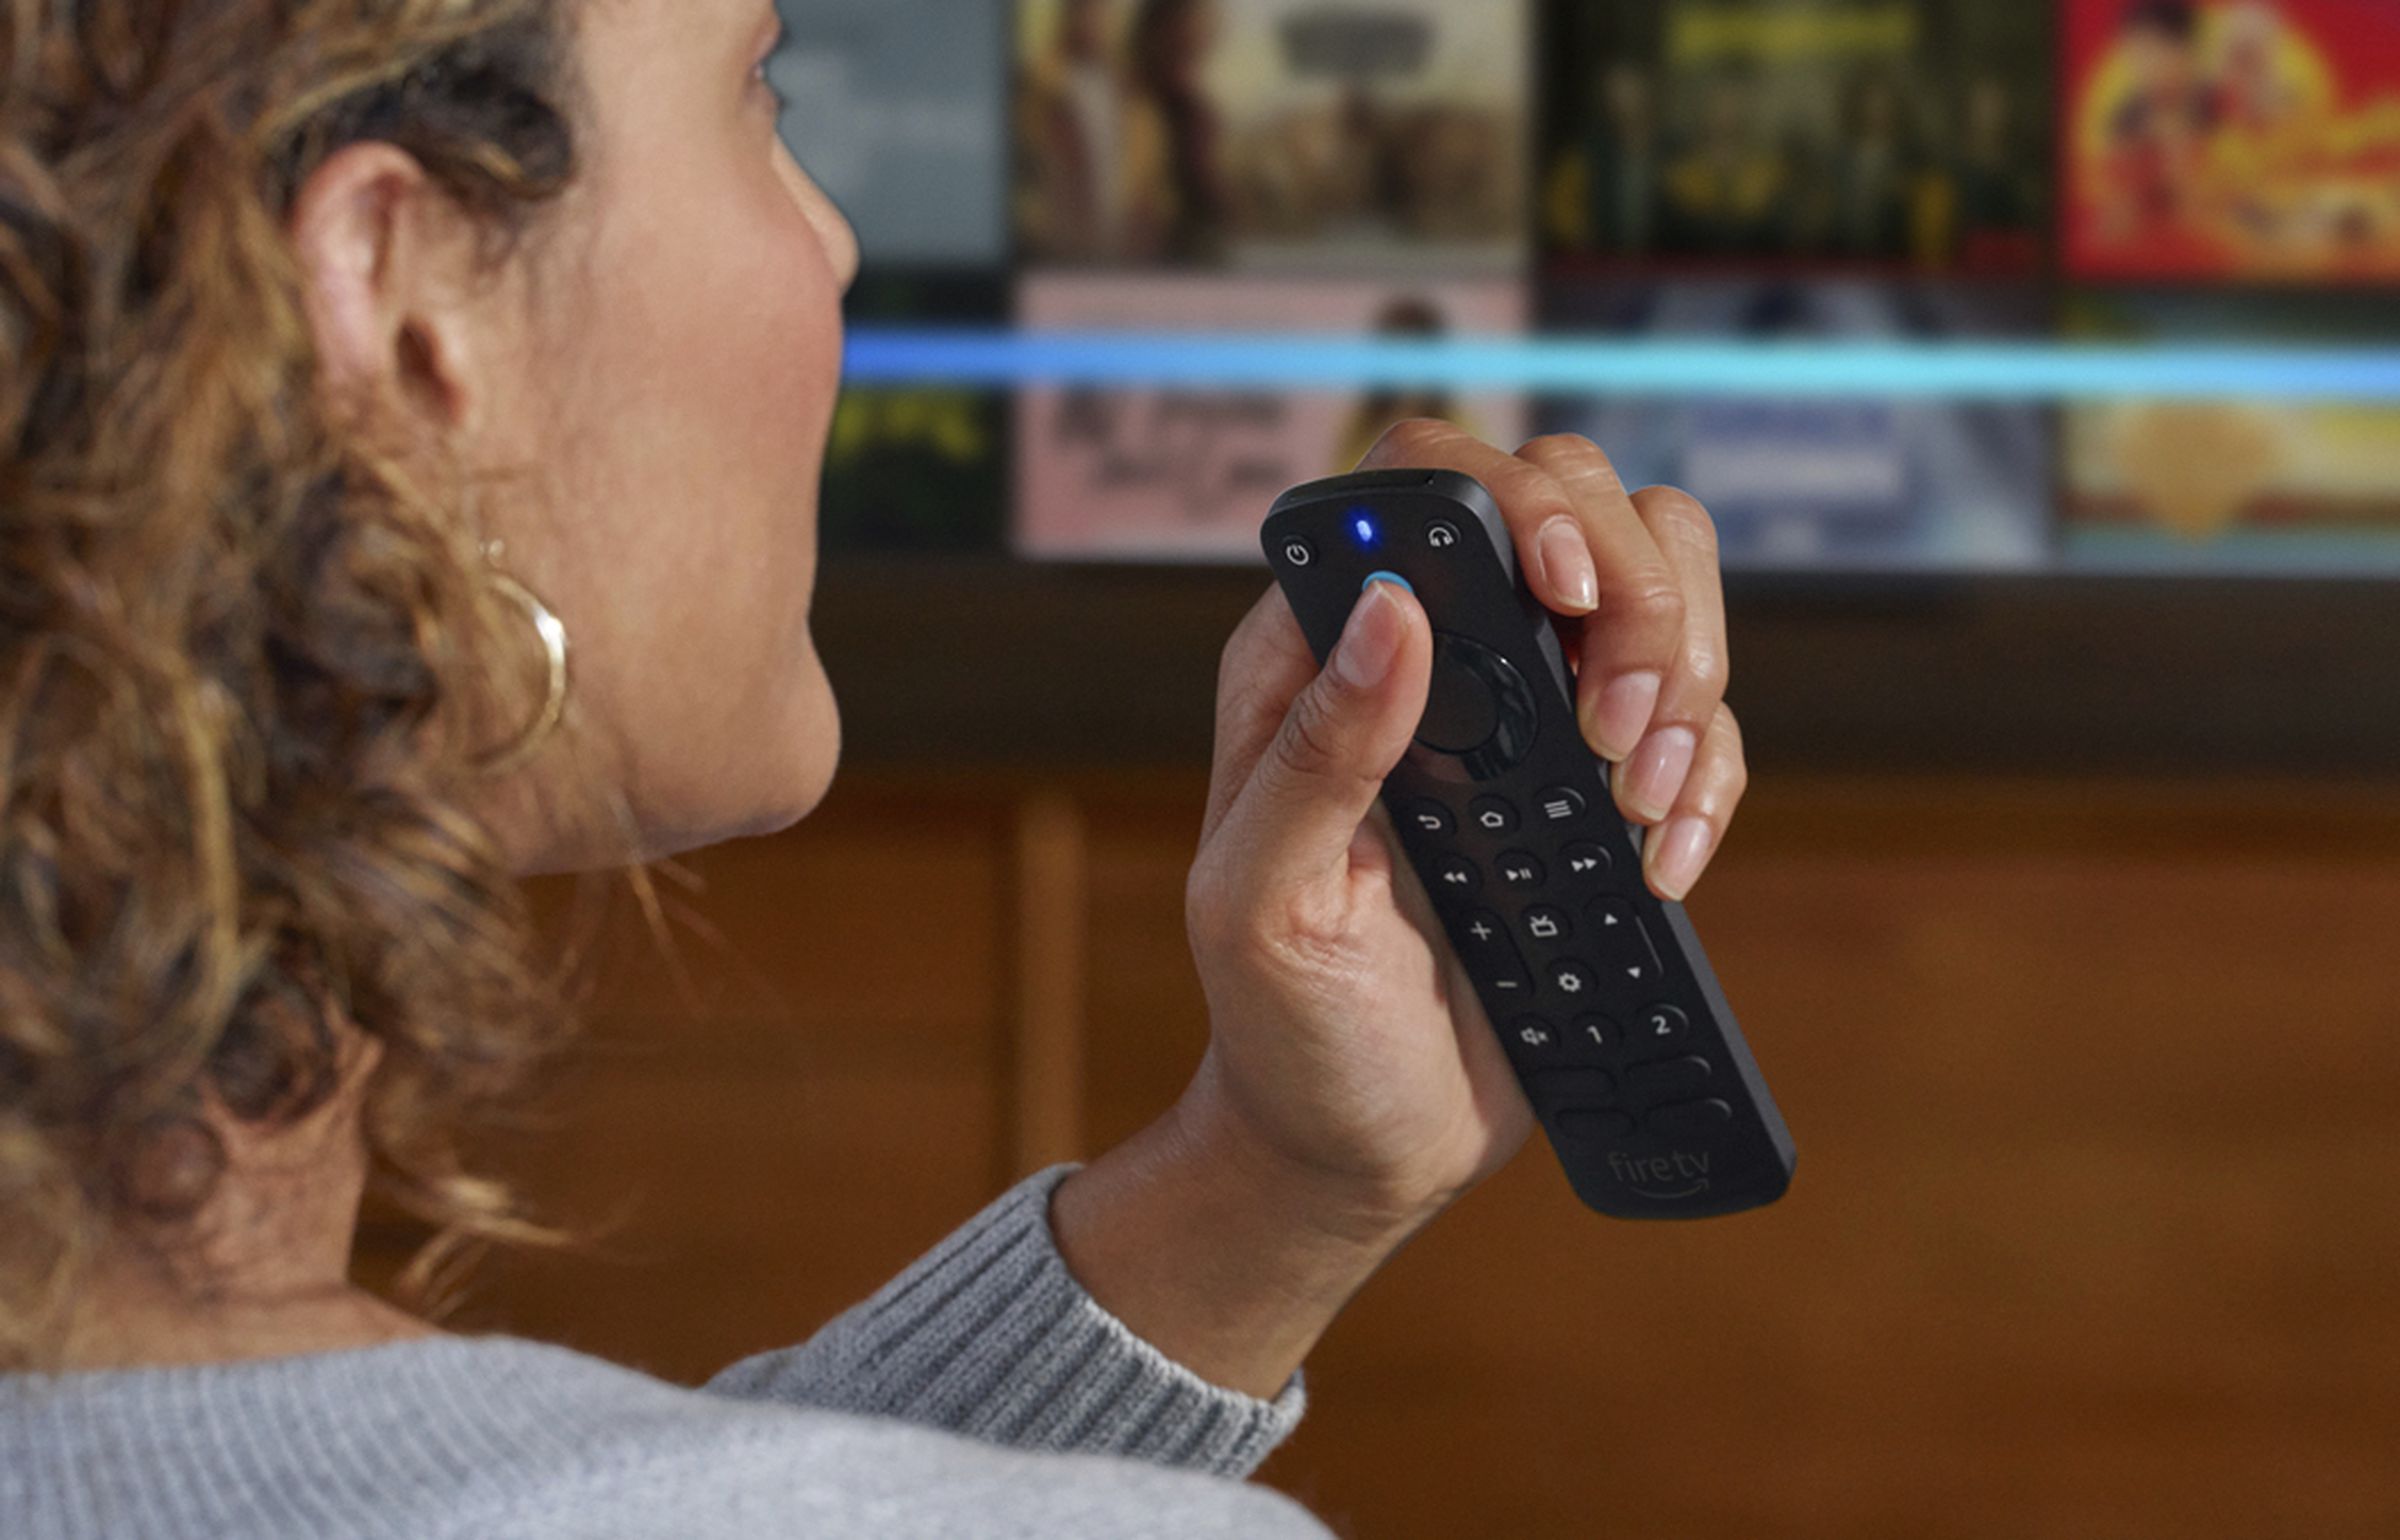 An image of a woman speaking voice commands to Amazon’s Alexa Voice Remote Pro while holding it in her left hand.